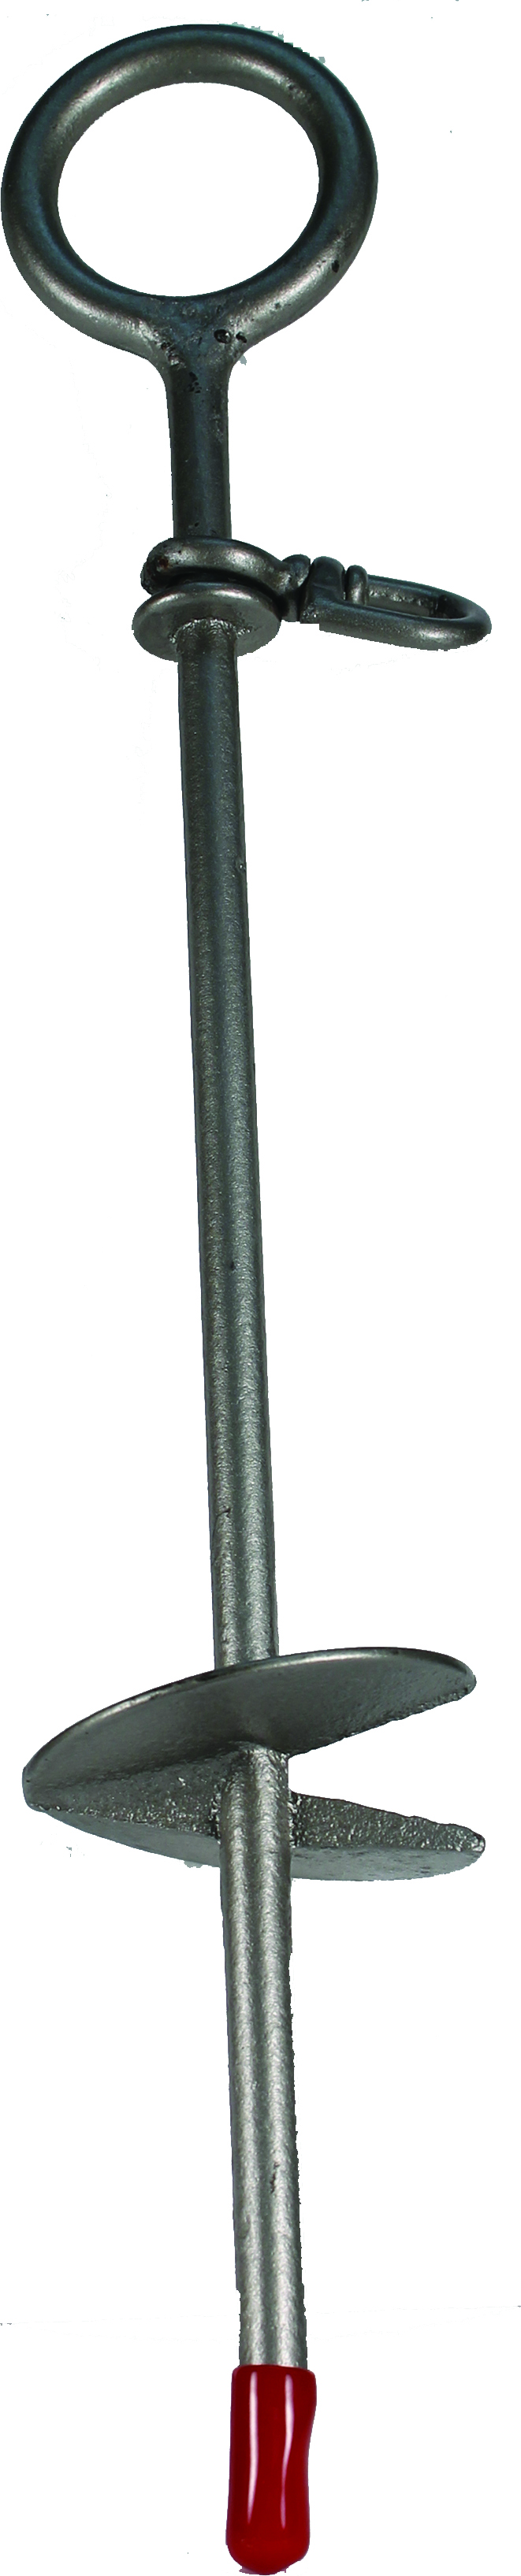 AUGER TIE OUT STAKE